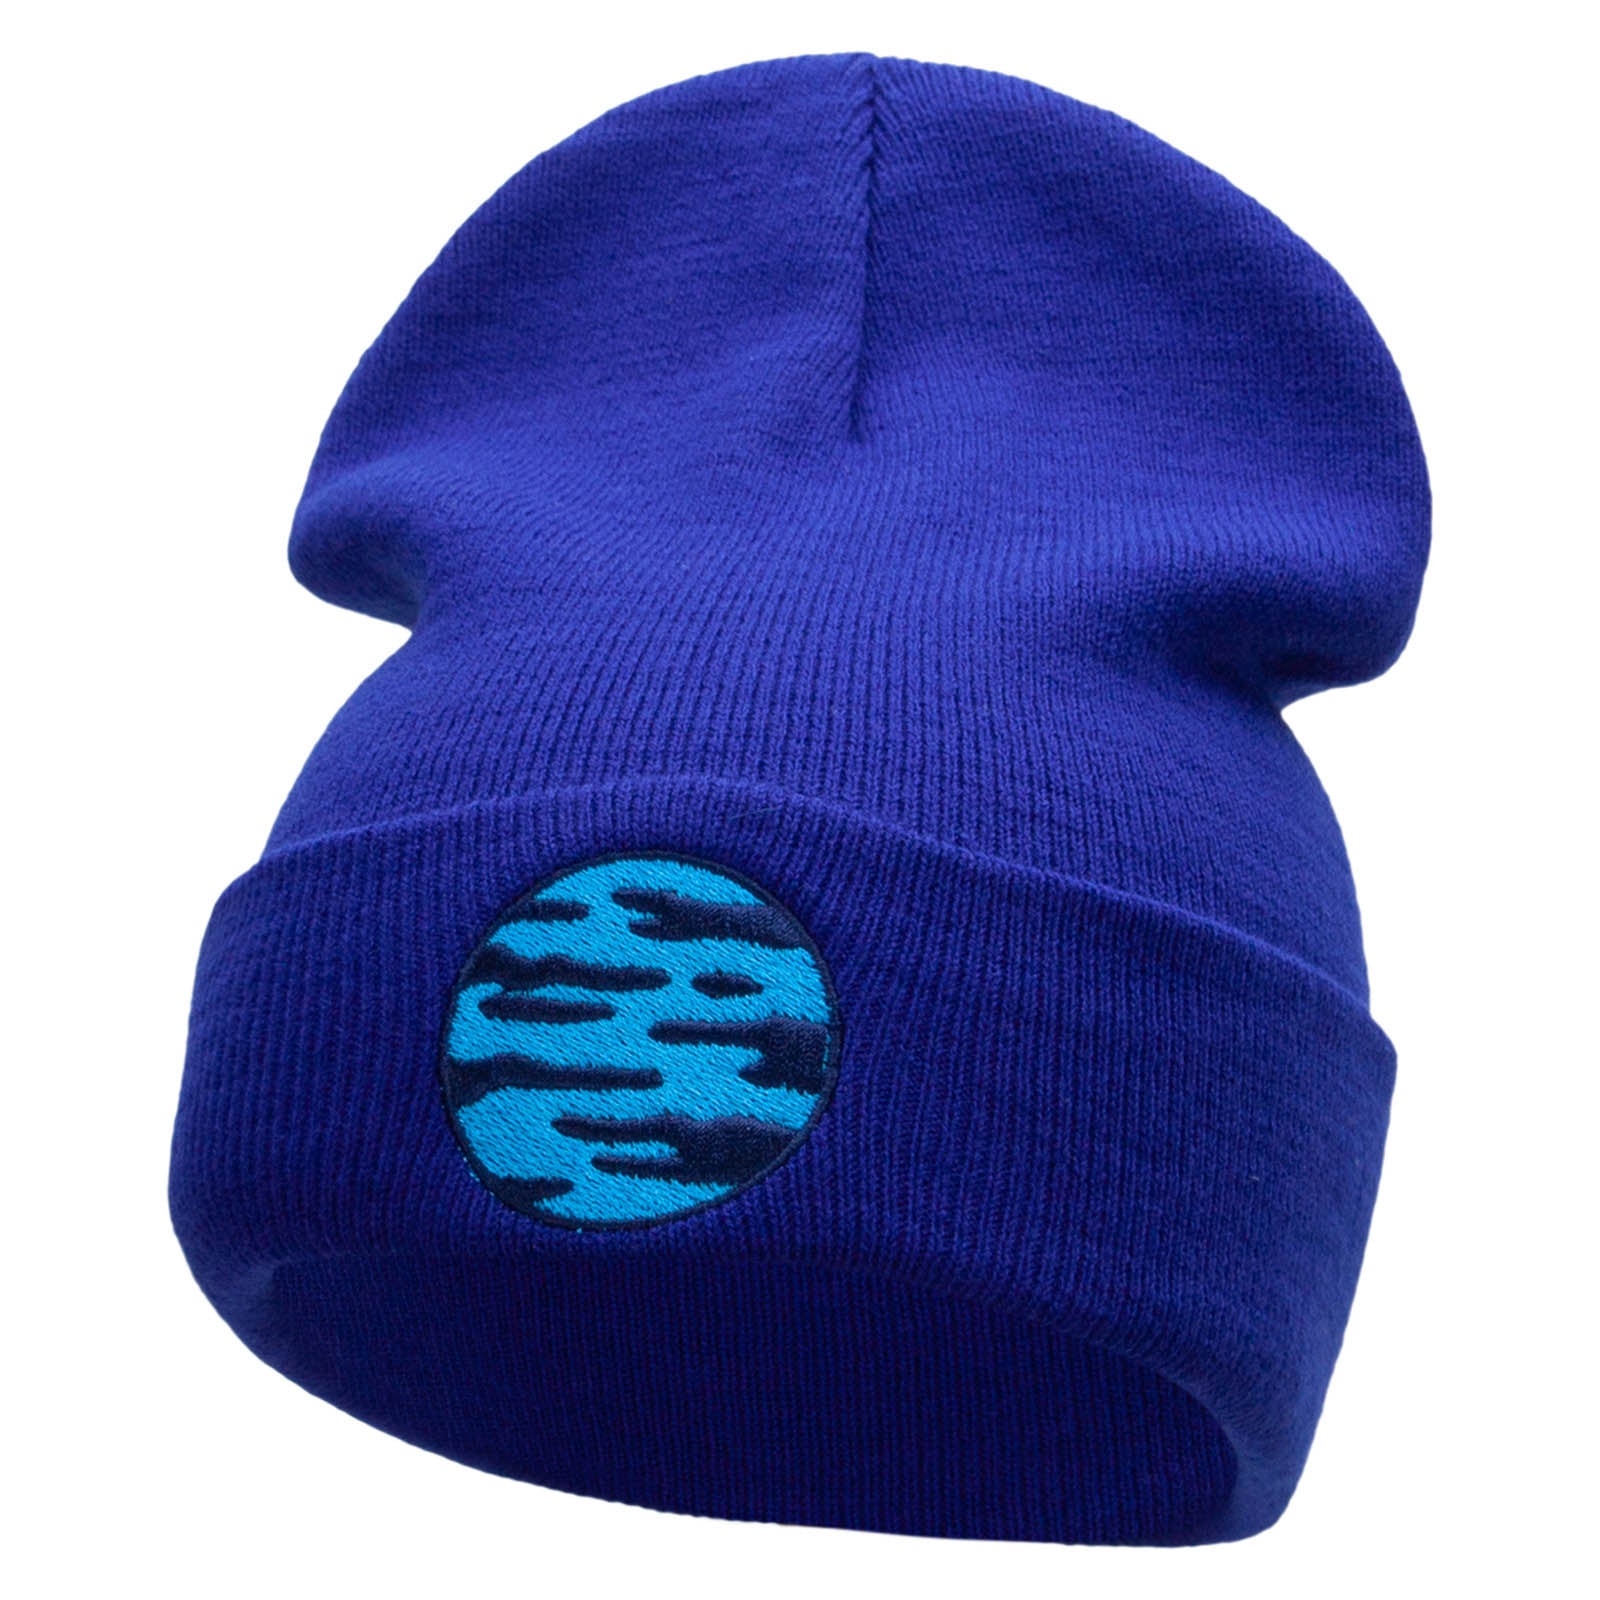 Neptune Embroidered 12 Inch Long Knitted Beanie - Royal OSFM